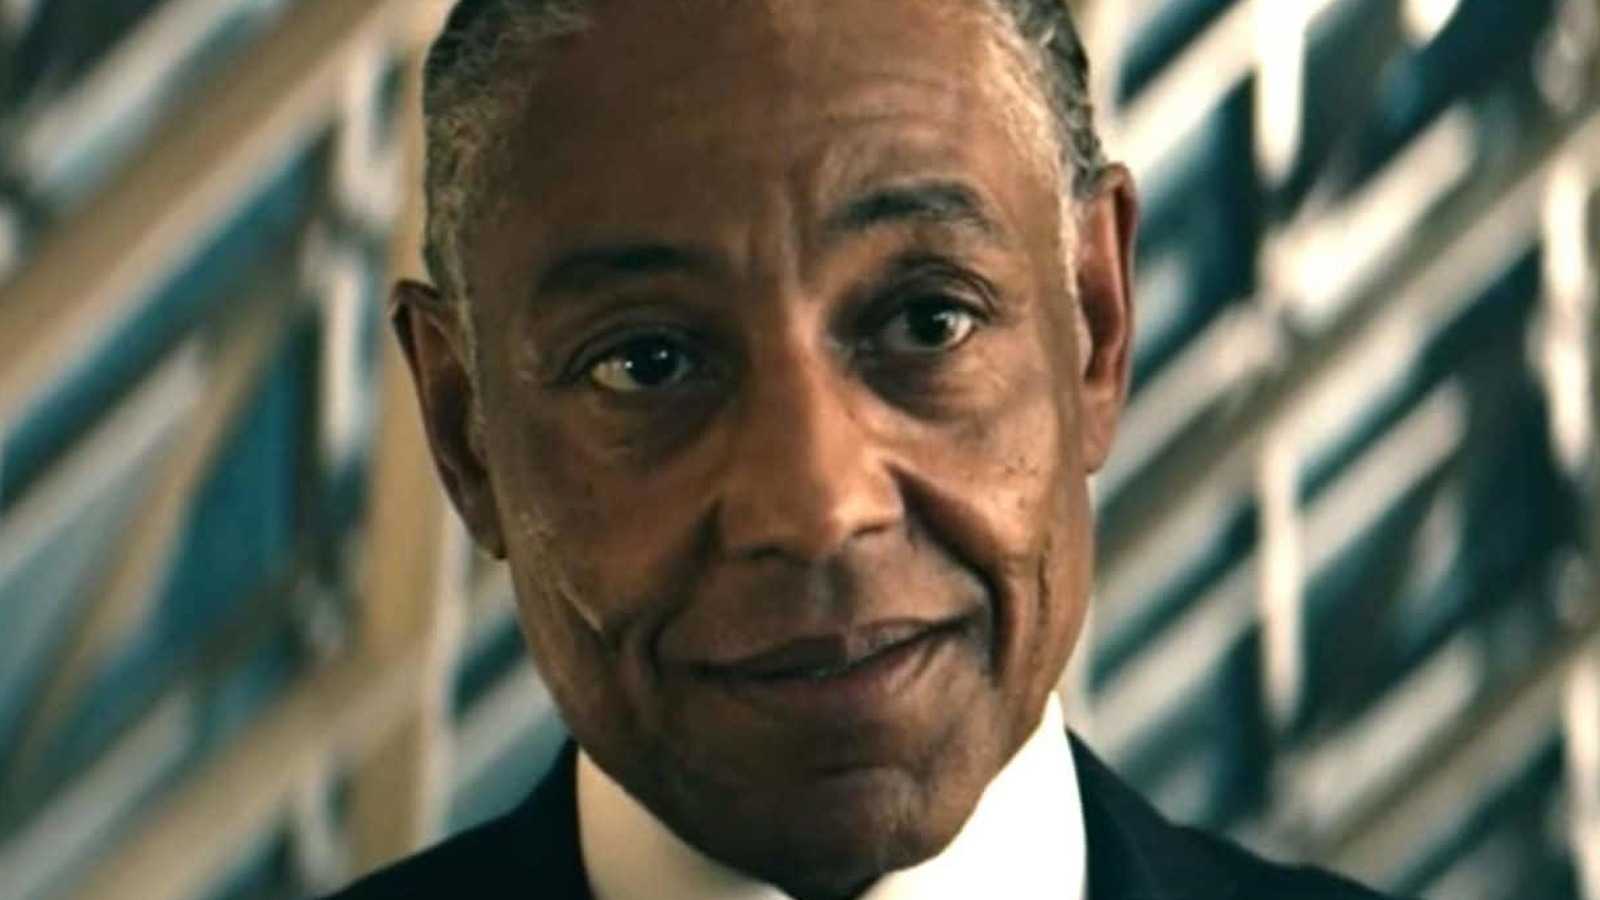 The Boys Star Giancarlo Esposito confirms that he is in talks with Marvel to play Professor X in The MCU